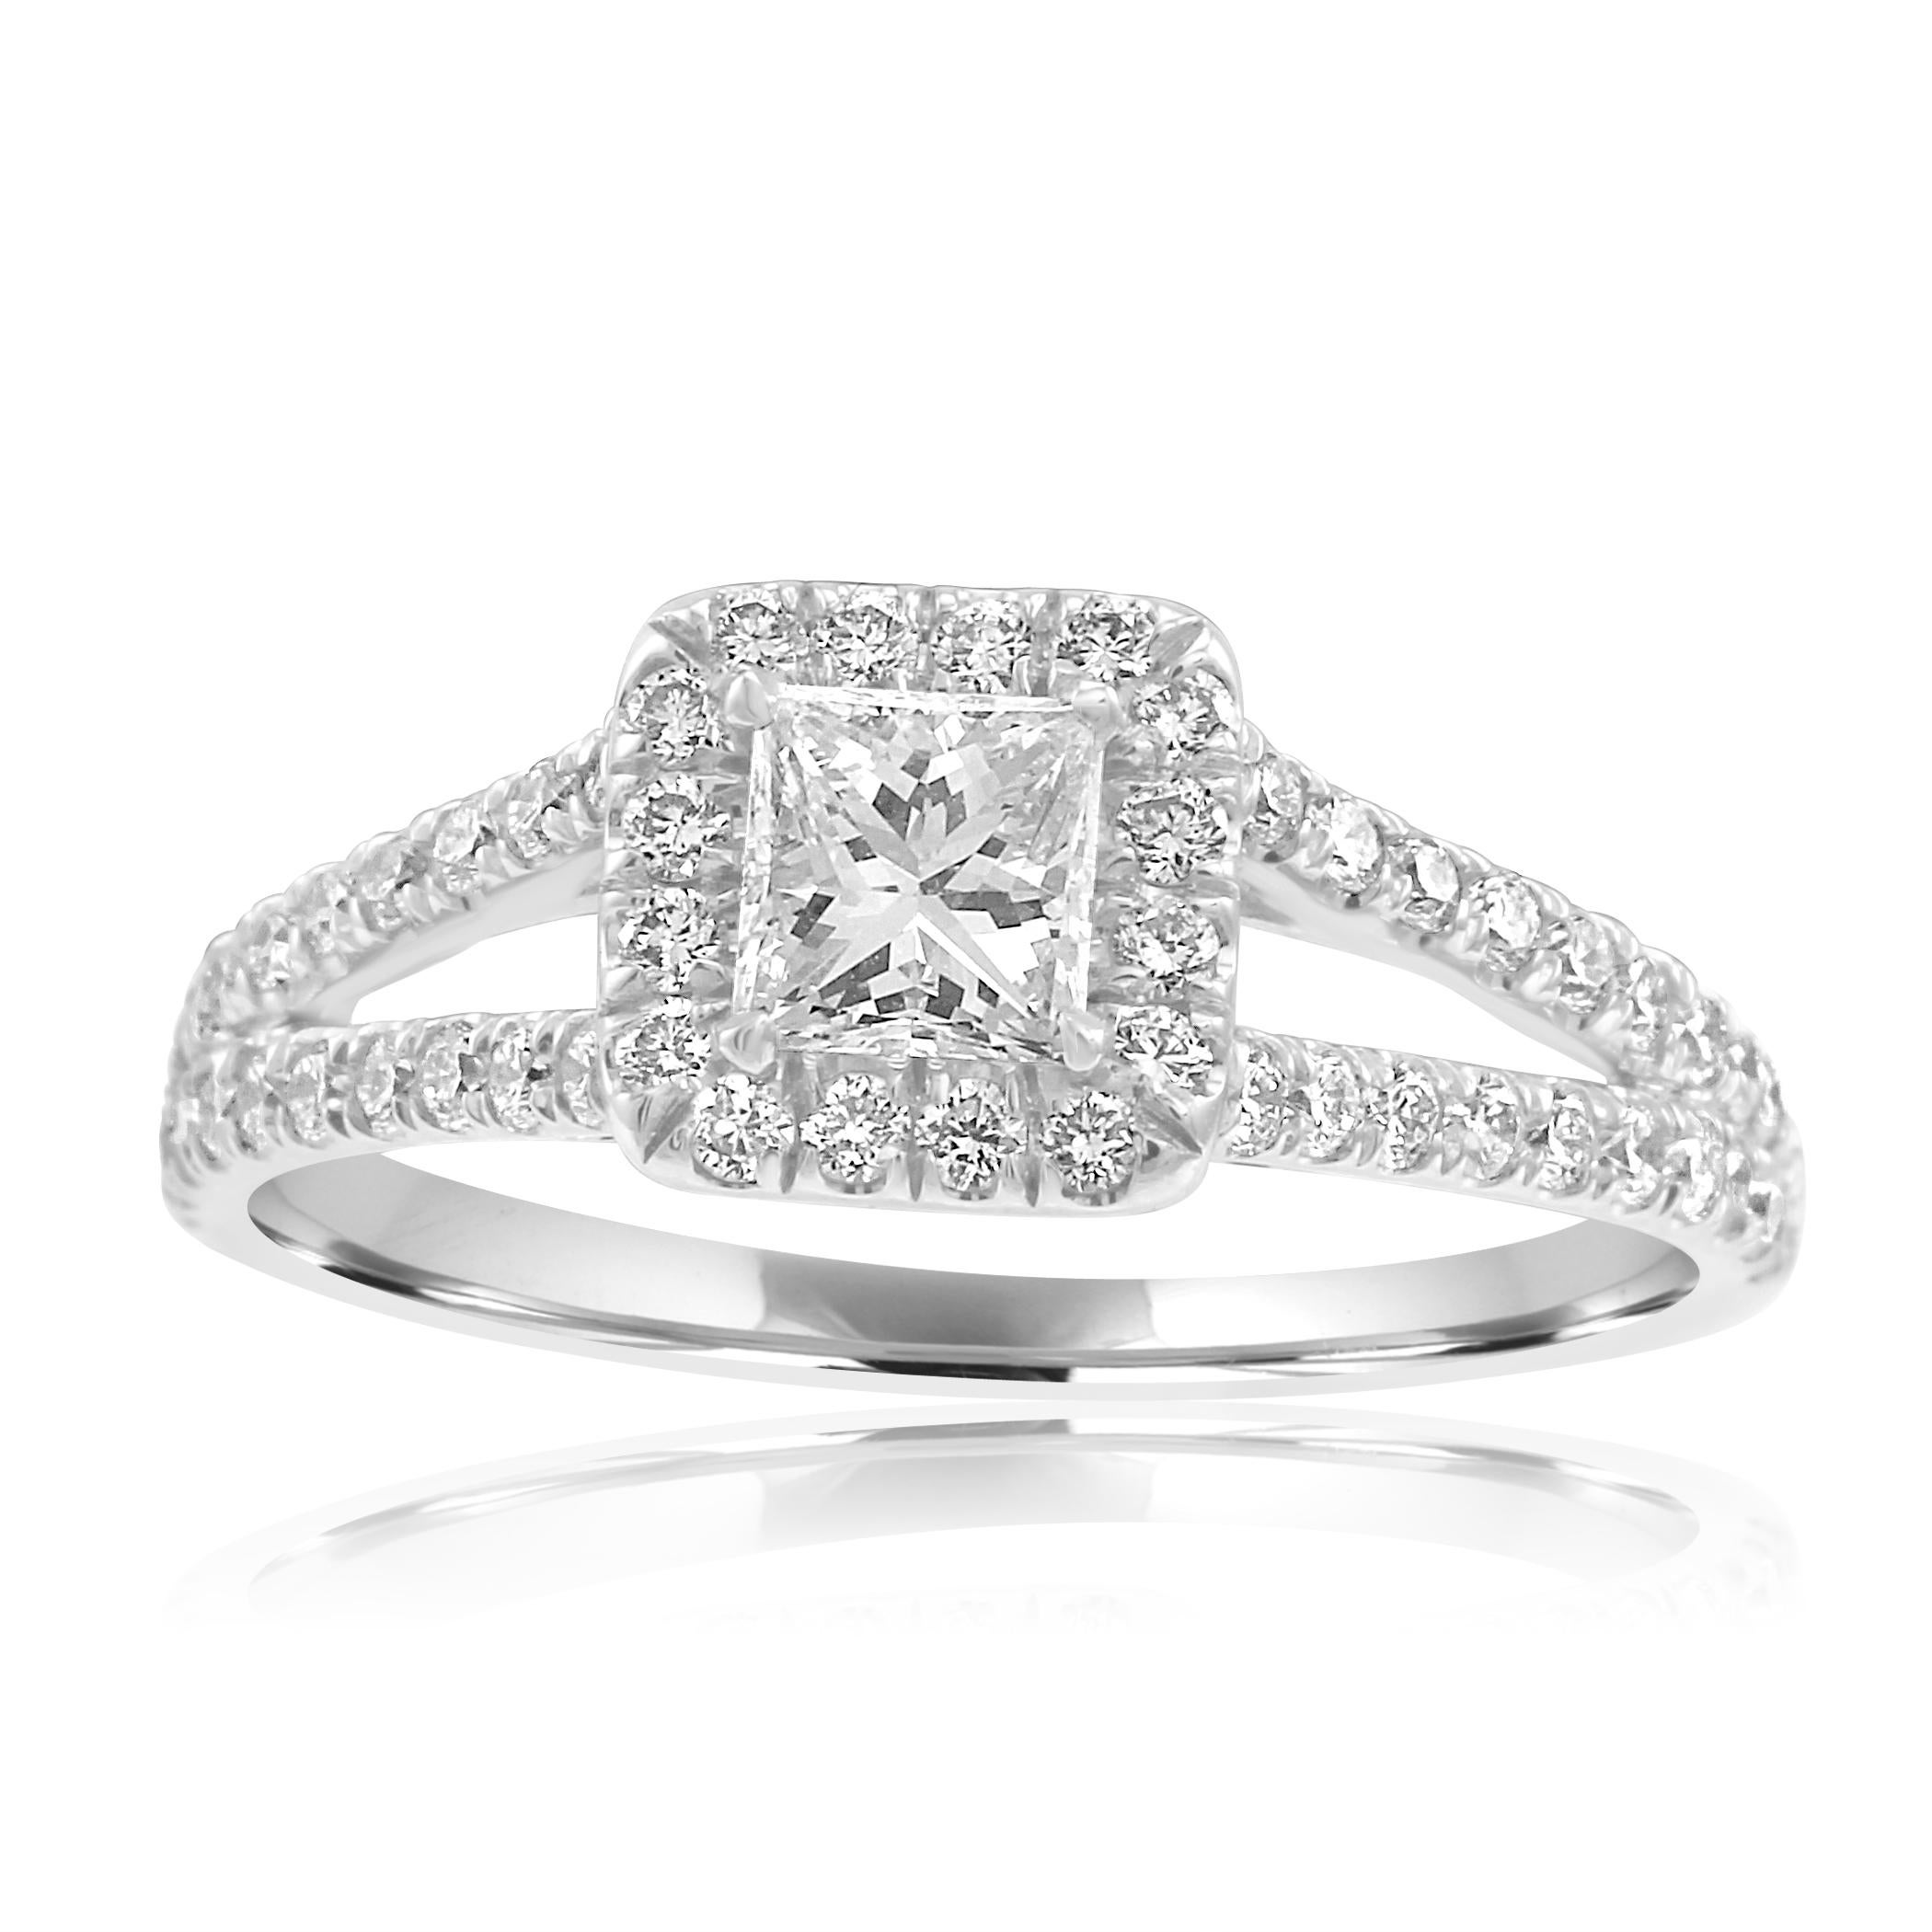 Gorgeous White Princess Cut Diamond G-H Color SI Clarity 0.42 Carat encircled in a Single Halo of White G-H Color VS-SI Clarity 0.50 Carat Round Diamonds in classy split shank 18K White Gold Bridal Fashion Ring.

Total Diamond Weight 0.92 Carat
MADE